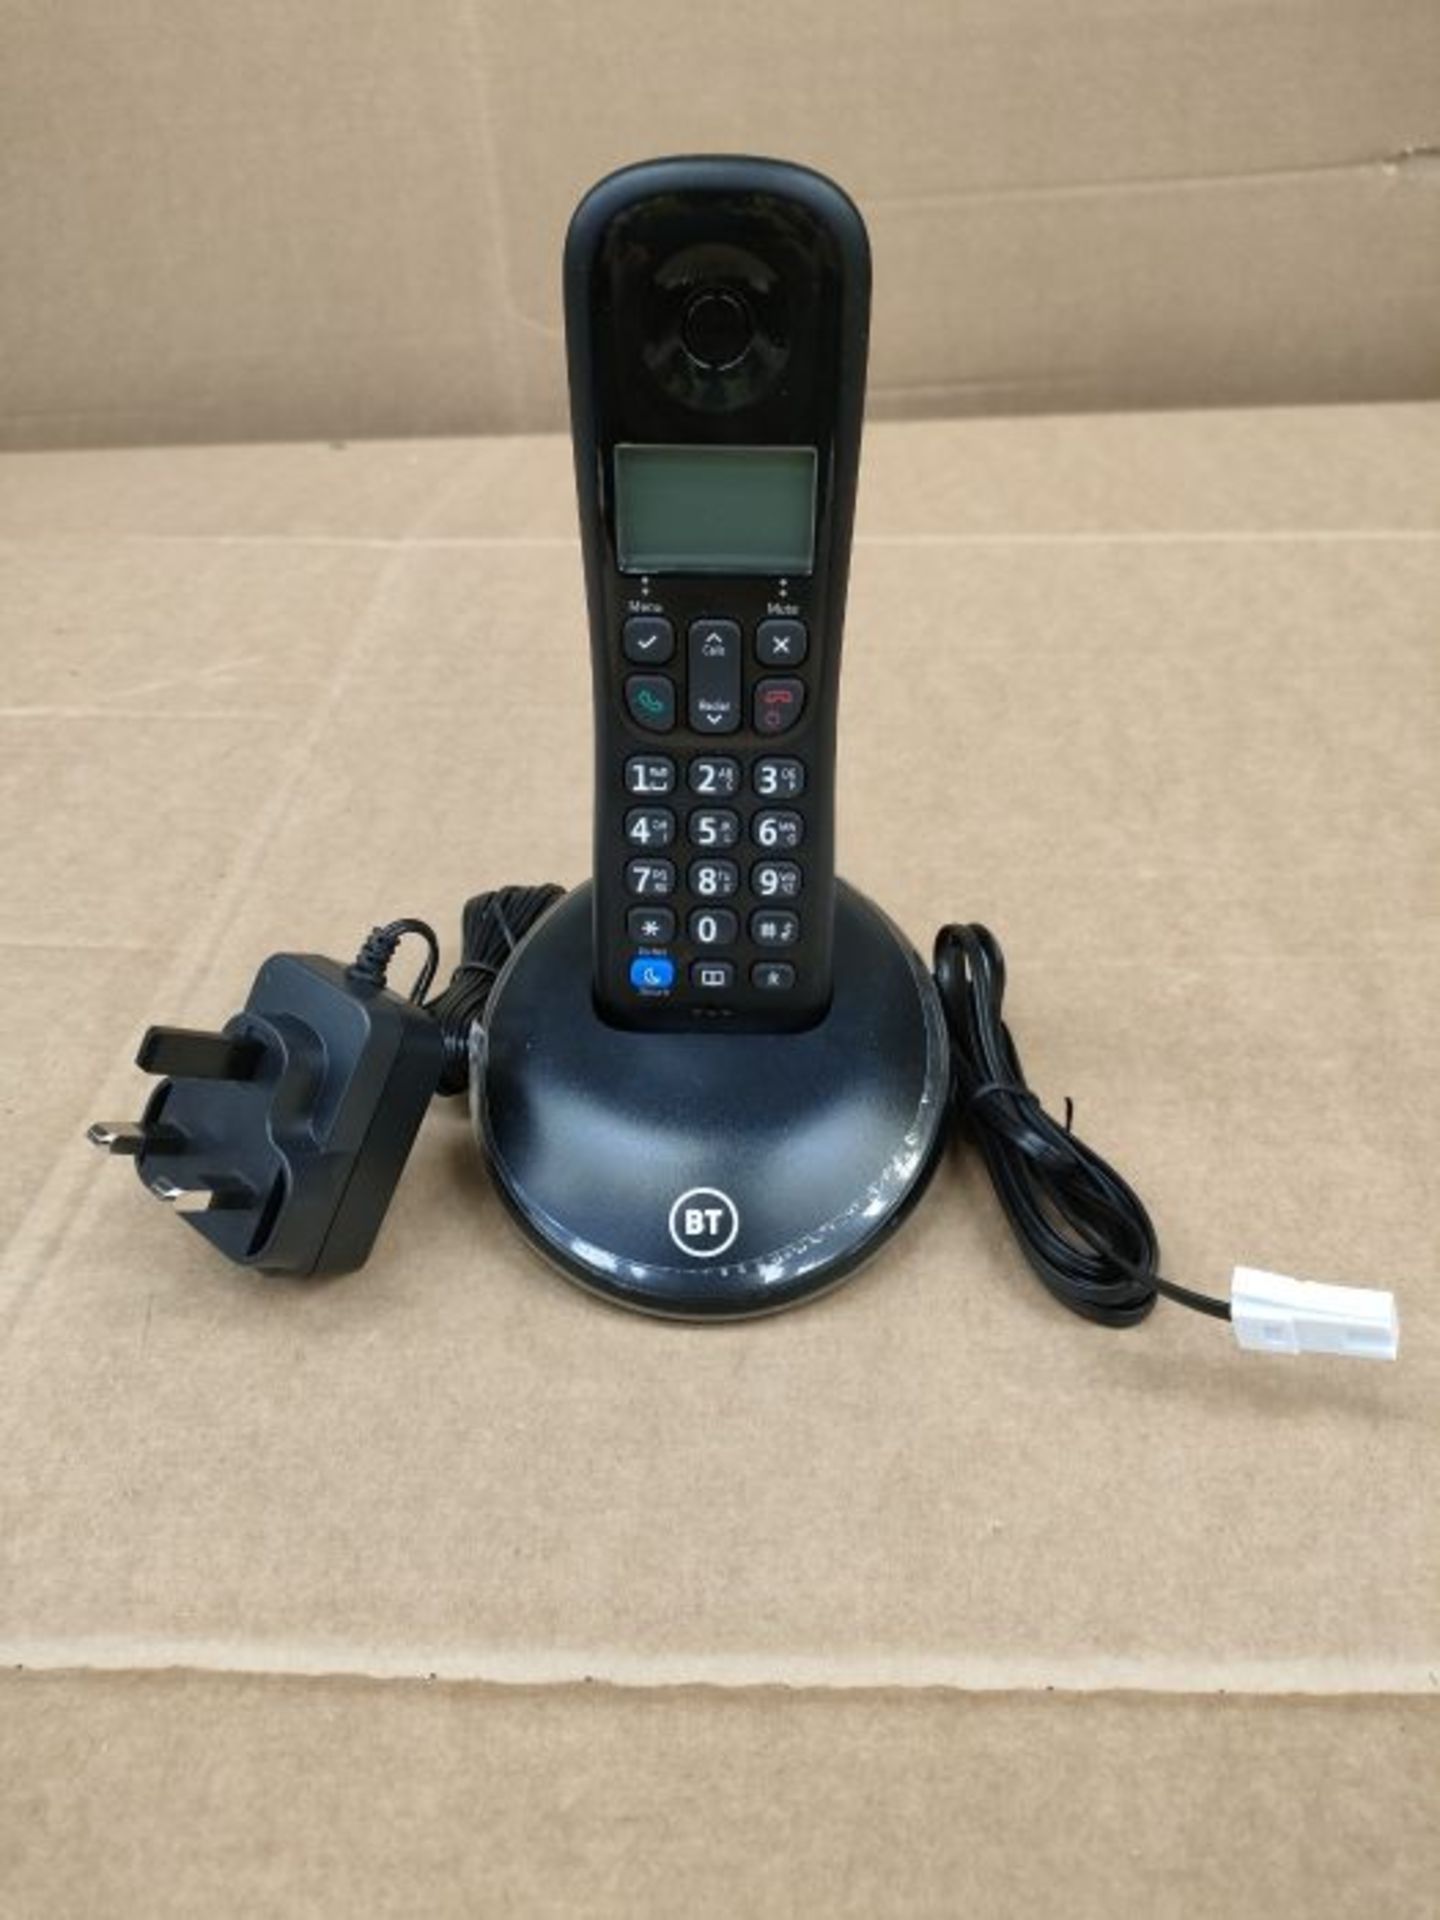 BT Everyday Cordless Home Phone with Basic Call Blocking, Single Handset Pack, Black - Image 3 of 3